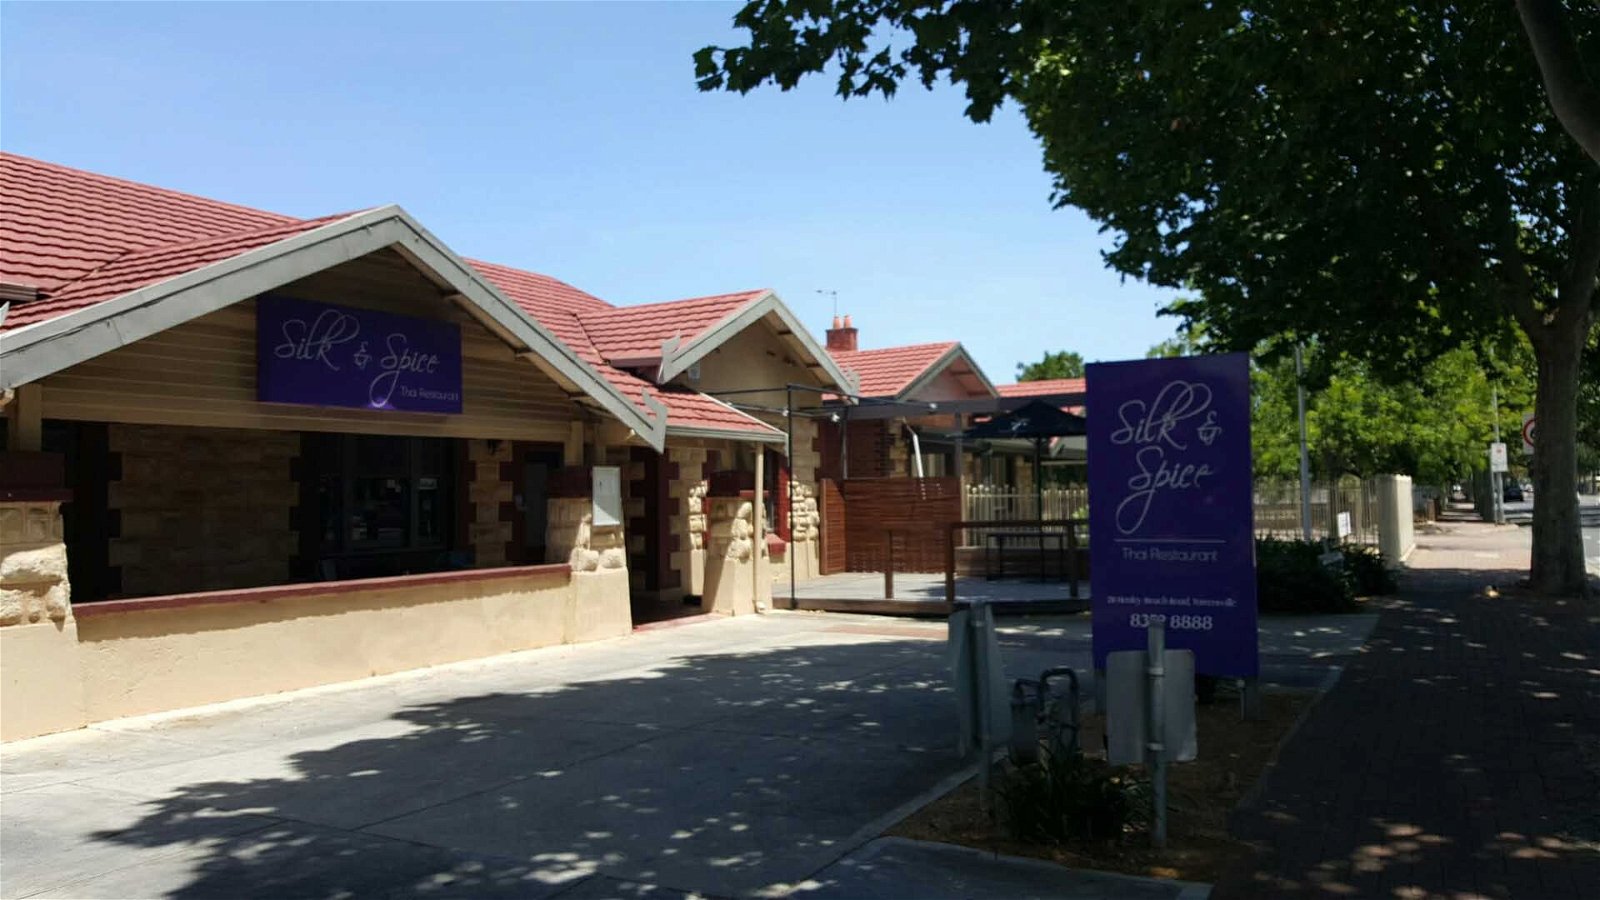 Silk and Spice Thai Restaurant - Mount Gambier Accommodation